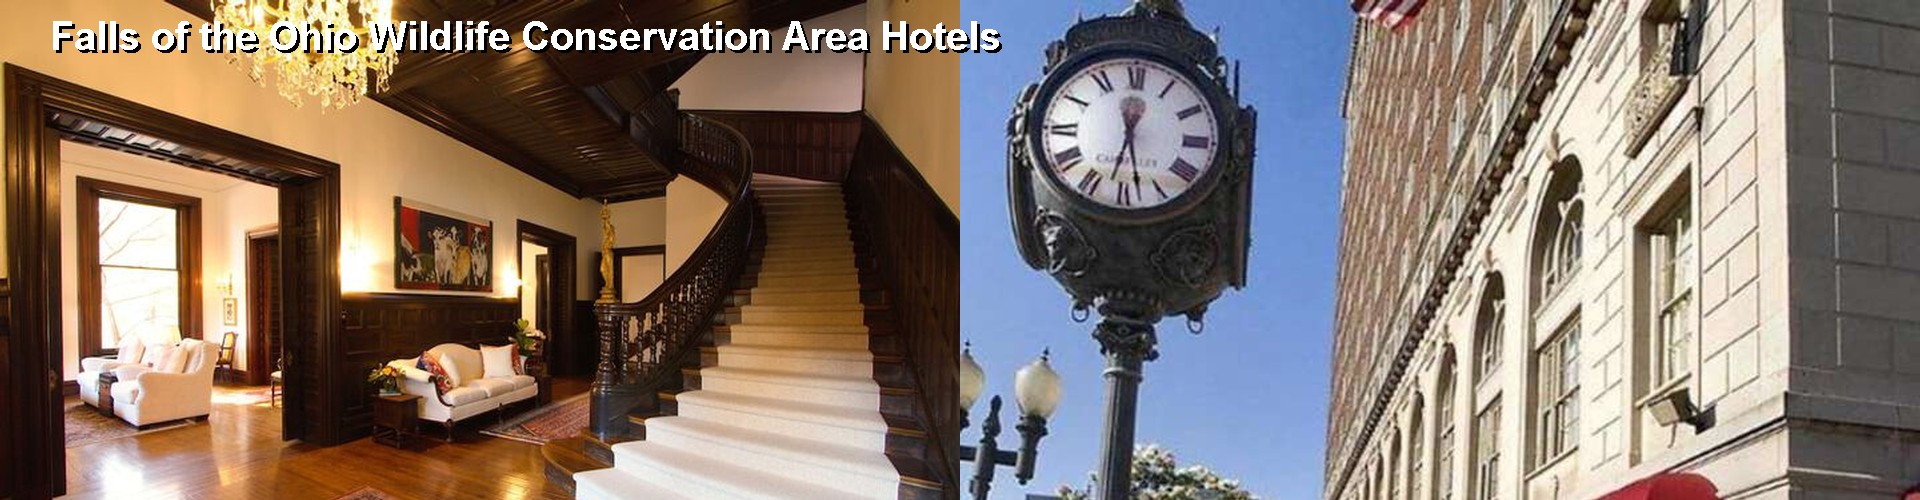 4 Best Hotels near Falls of the Ohio Wildlife Conservation Area